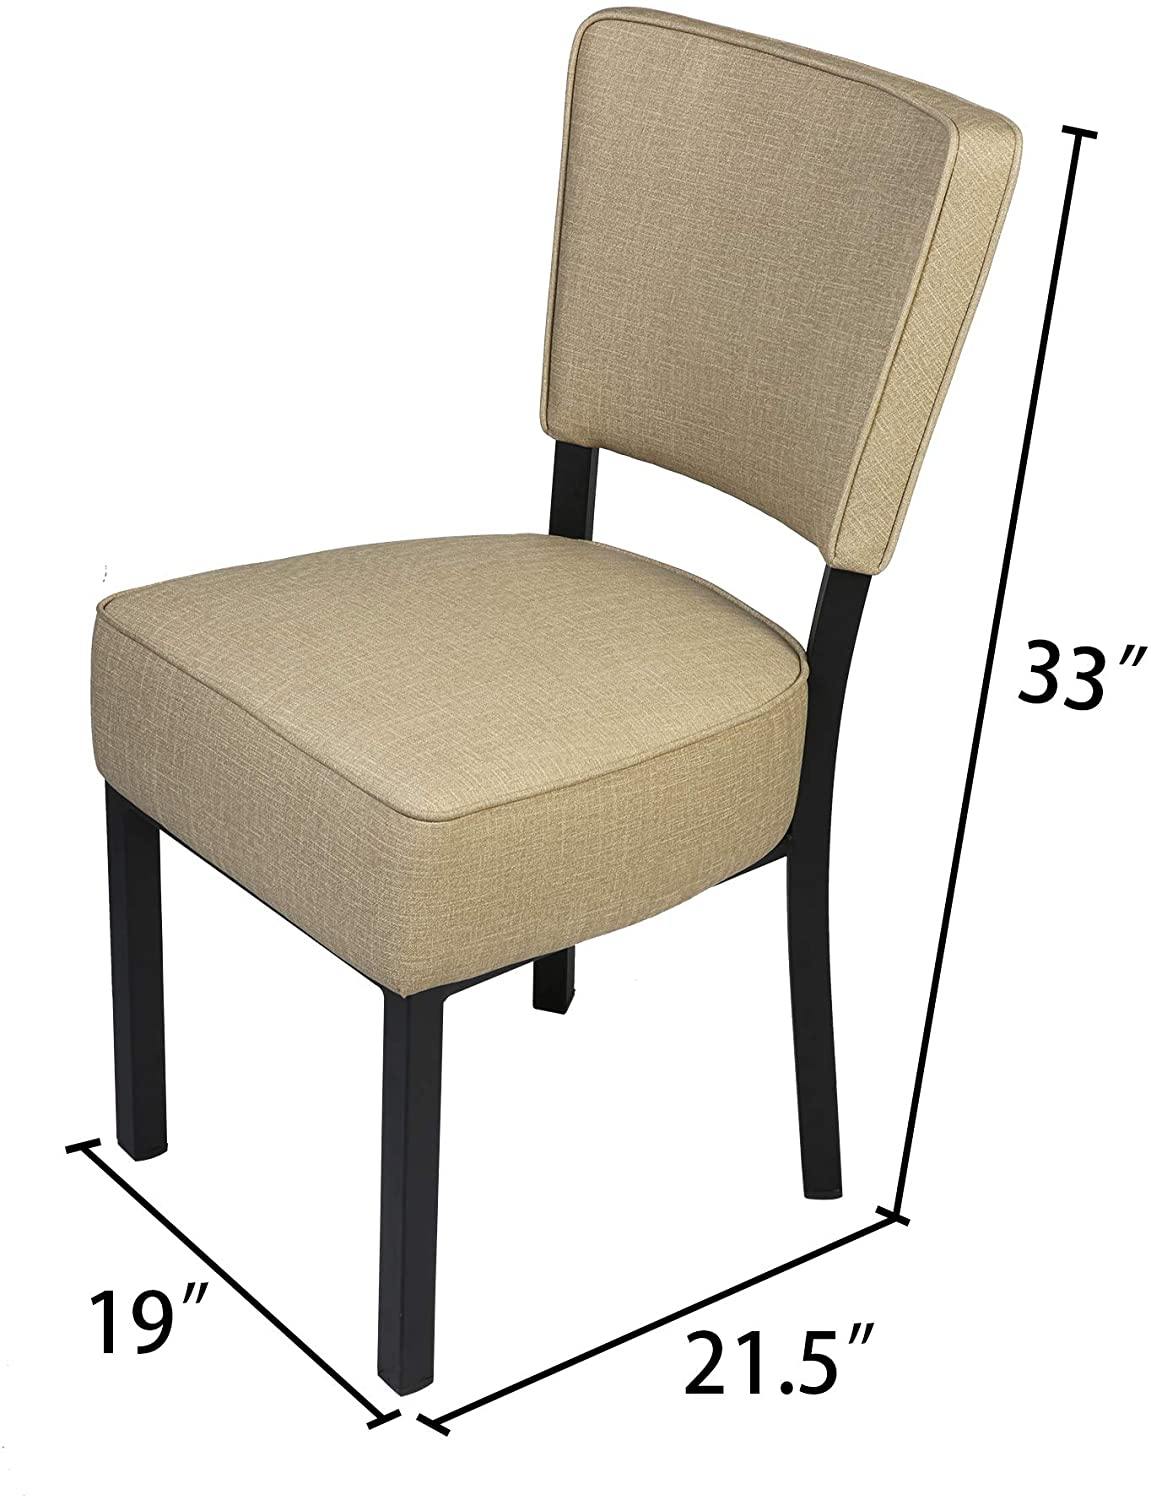 Set of 2 Classic Dining Chair, Modern Style Family Leisure Chair with Stainless Steel Legs, PU Leather Mid Back Side Chair - Bosonshop